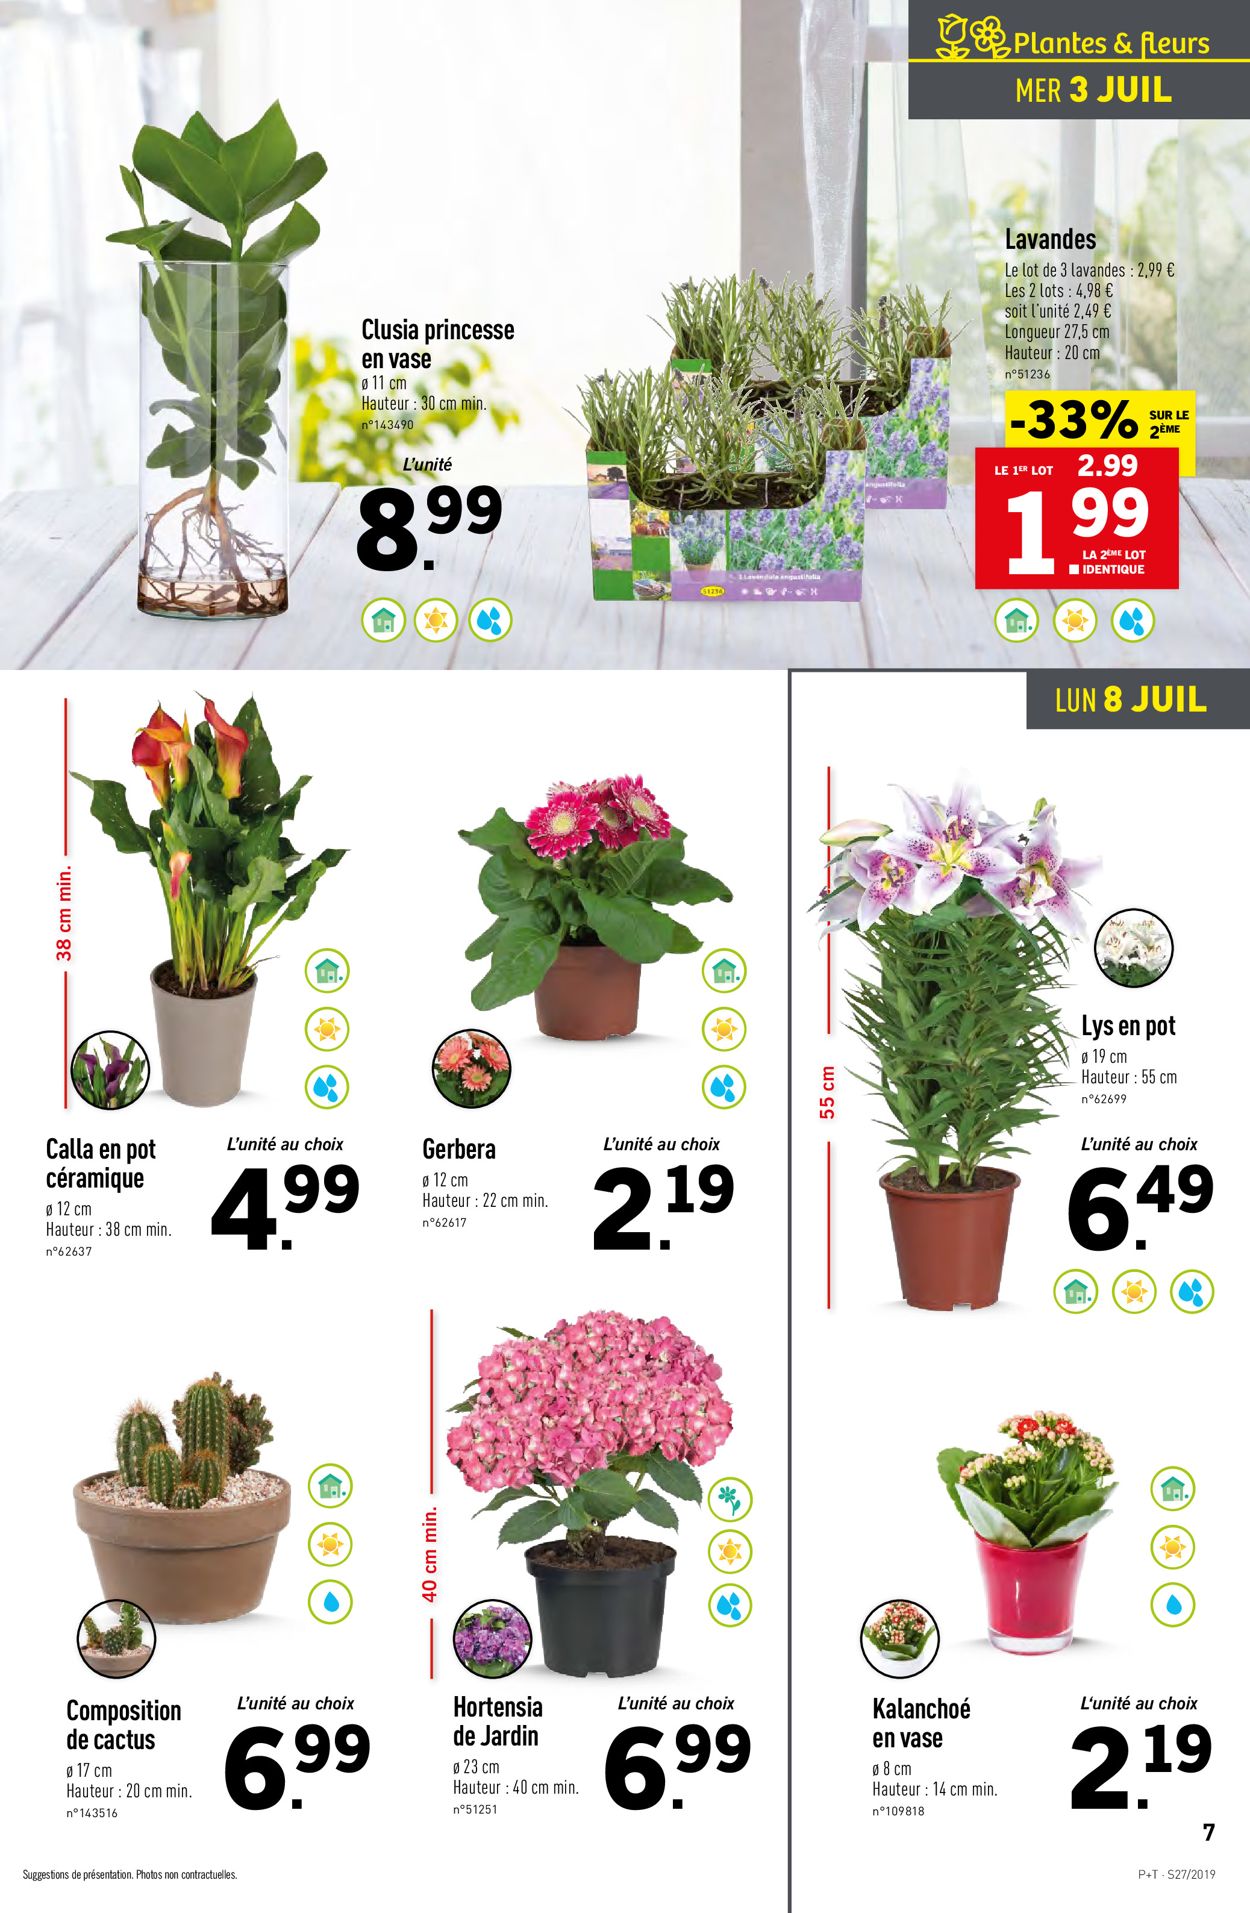 Lidl Catalogue - 03.07-09.07.2019 (Page 7)